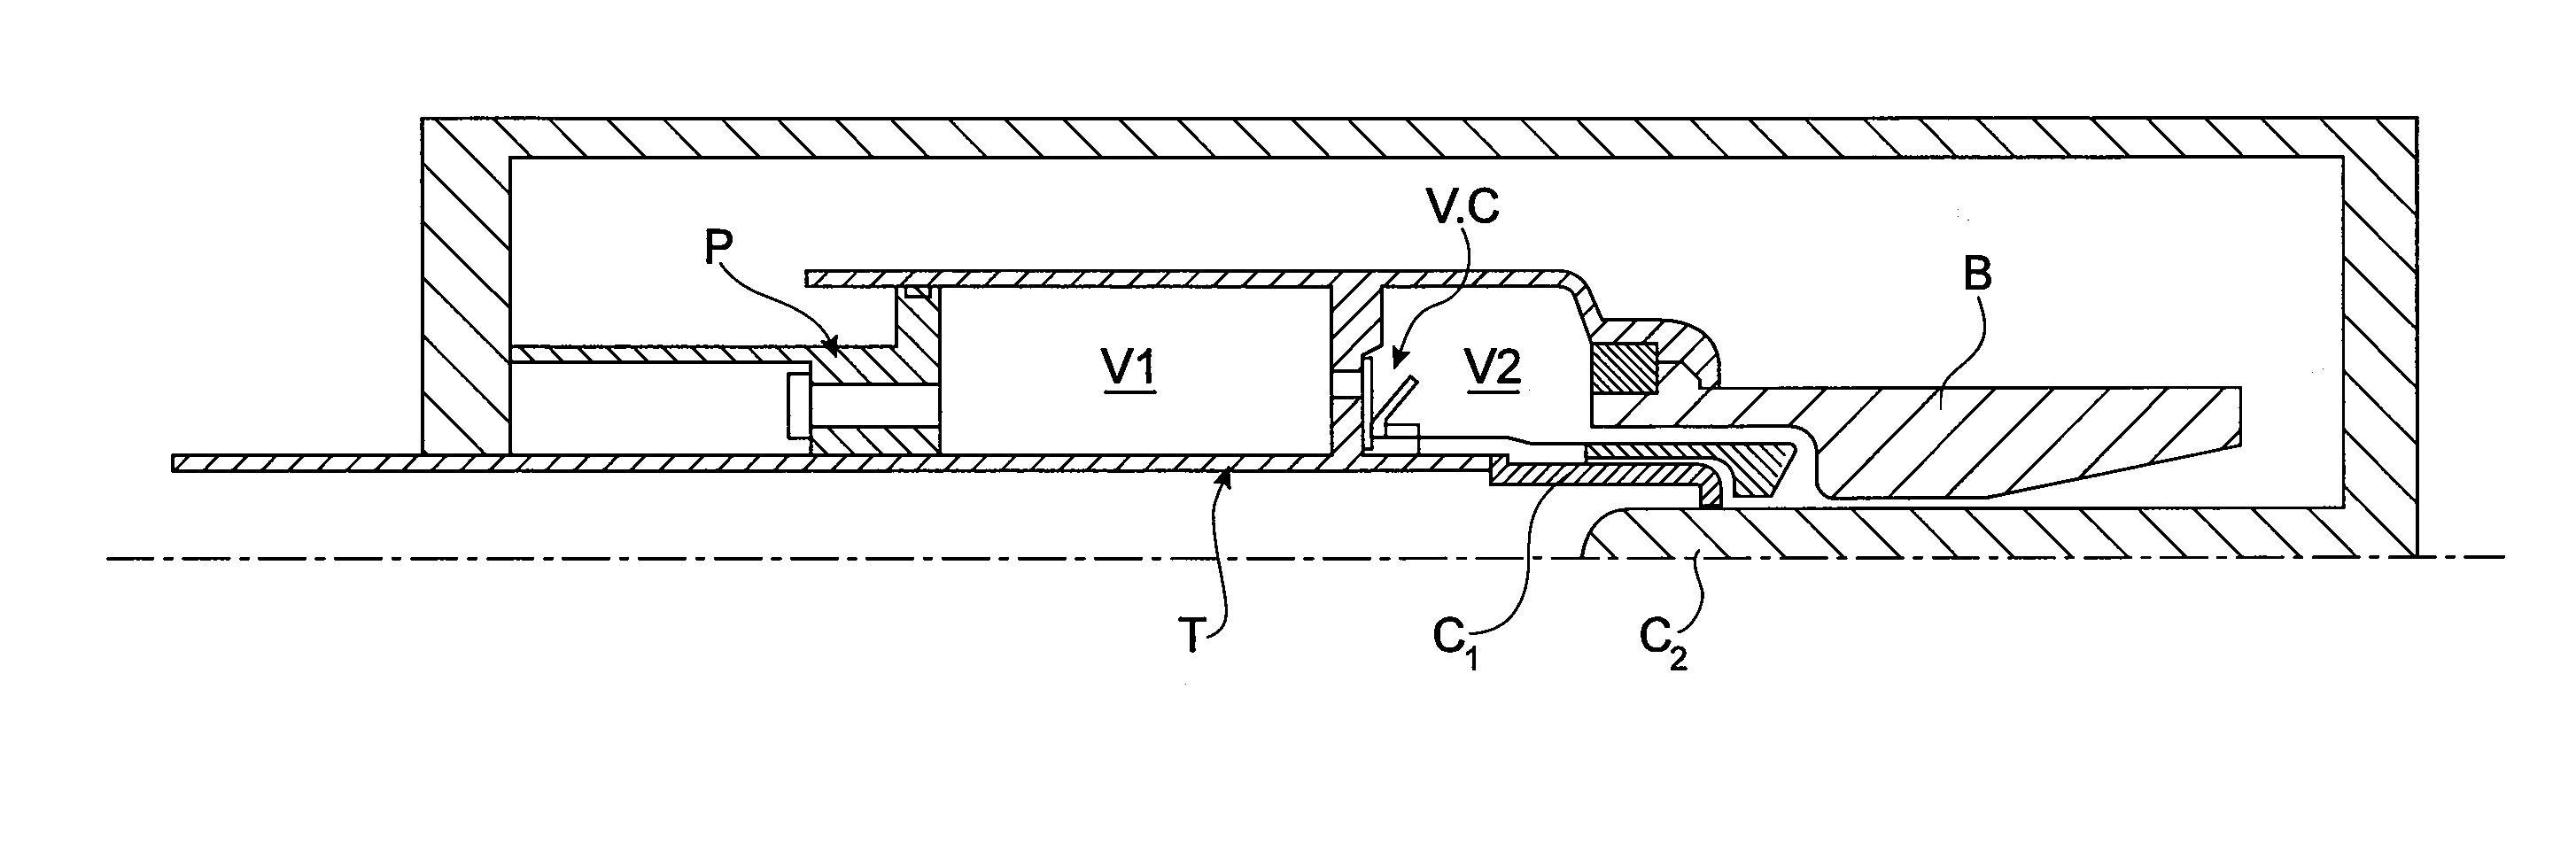 Relief valve for discharging a dielectric gas between two volumes of a high-voltage or medium-voltage interrupting chamber